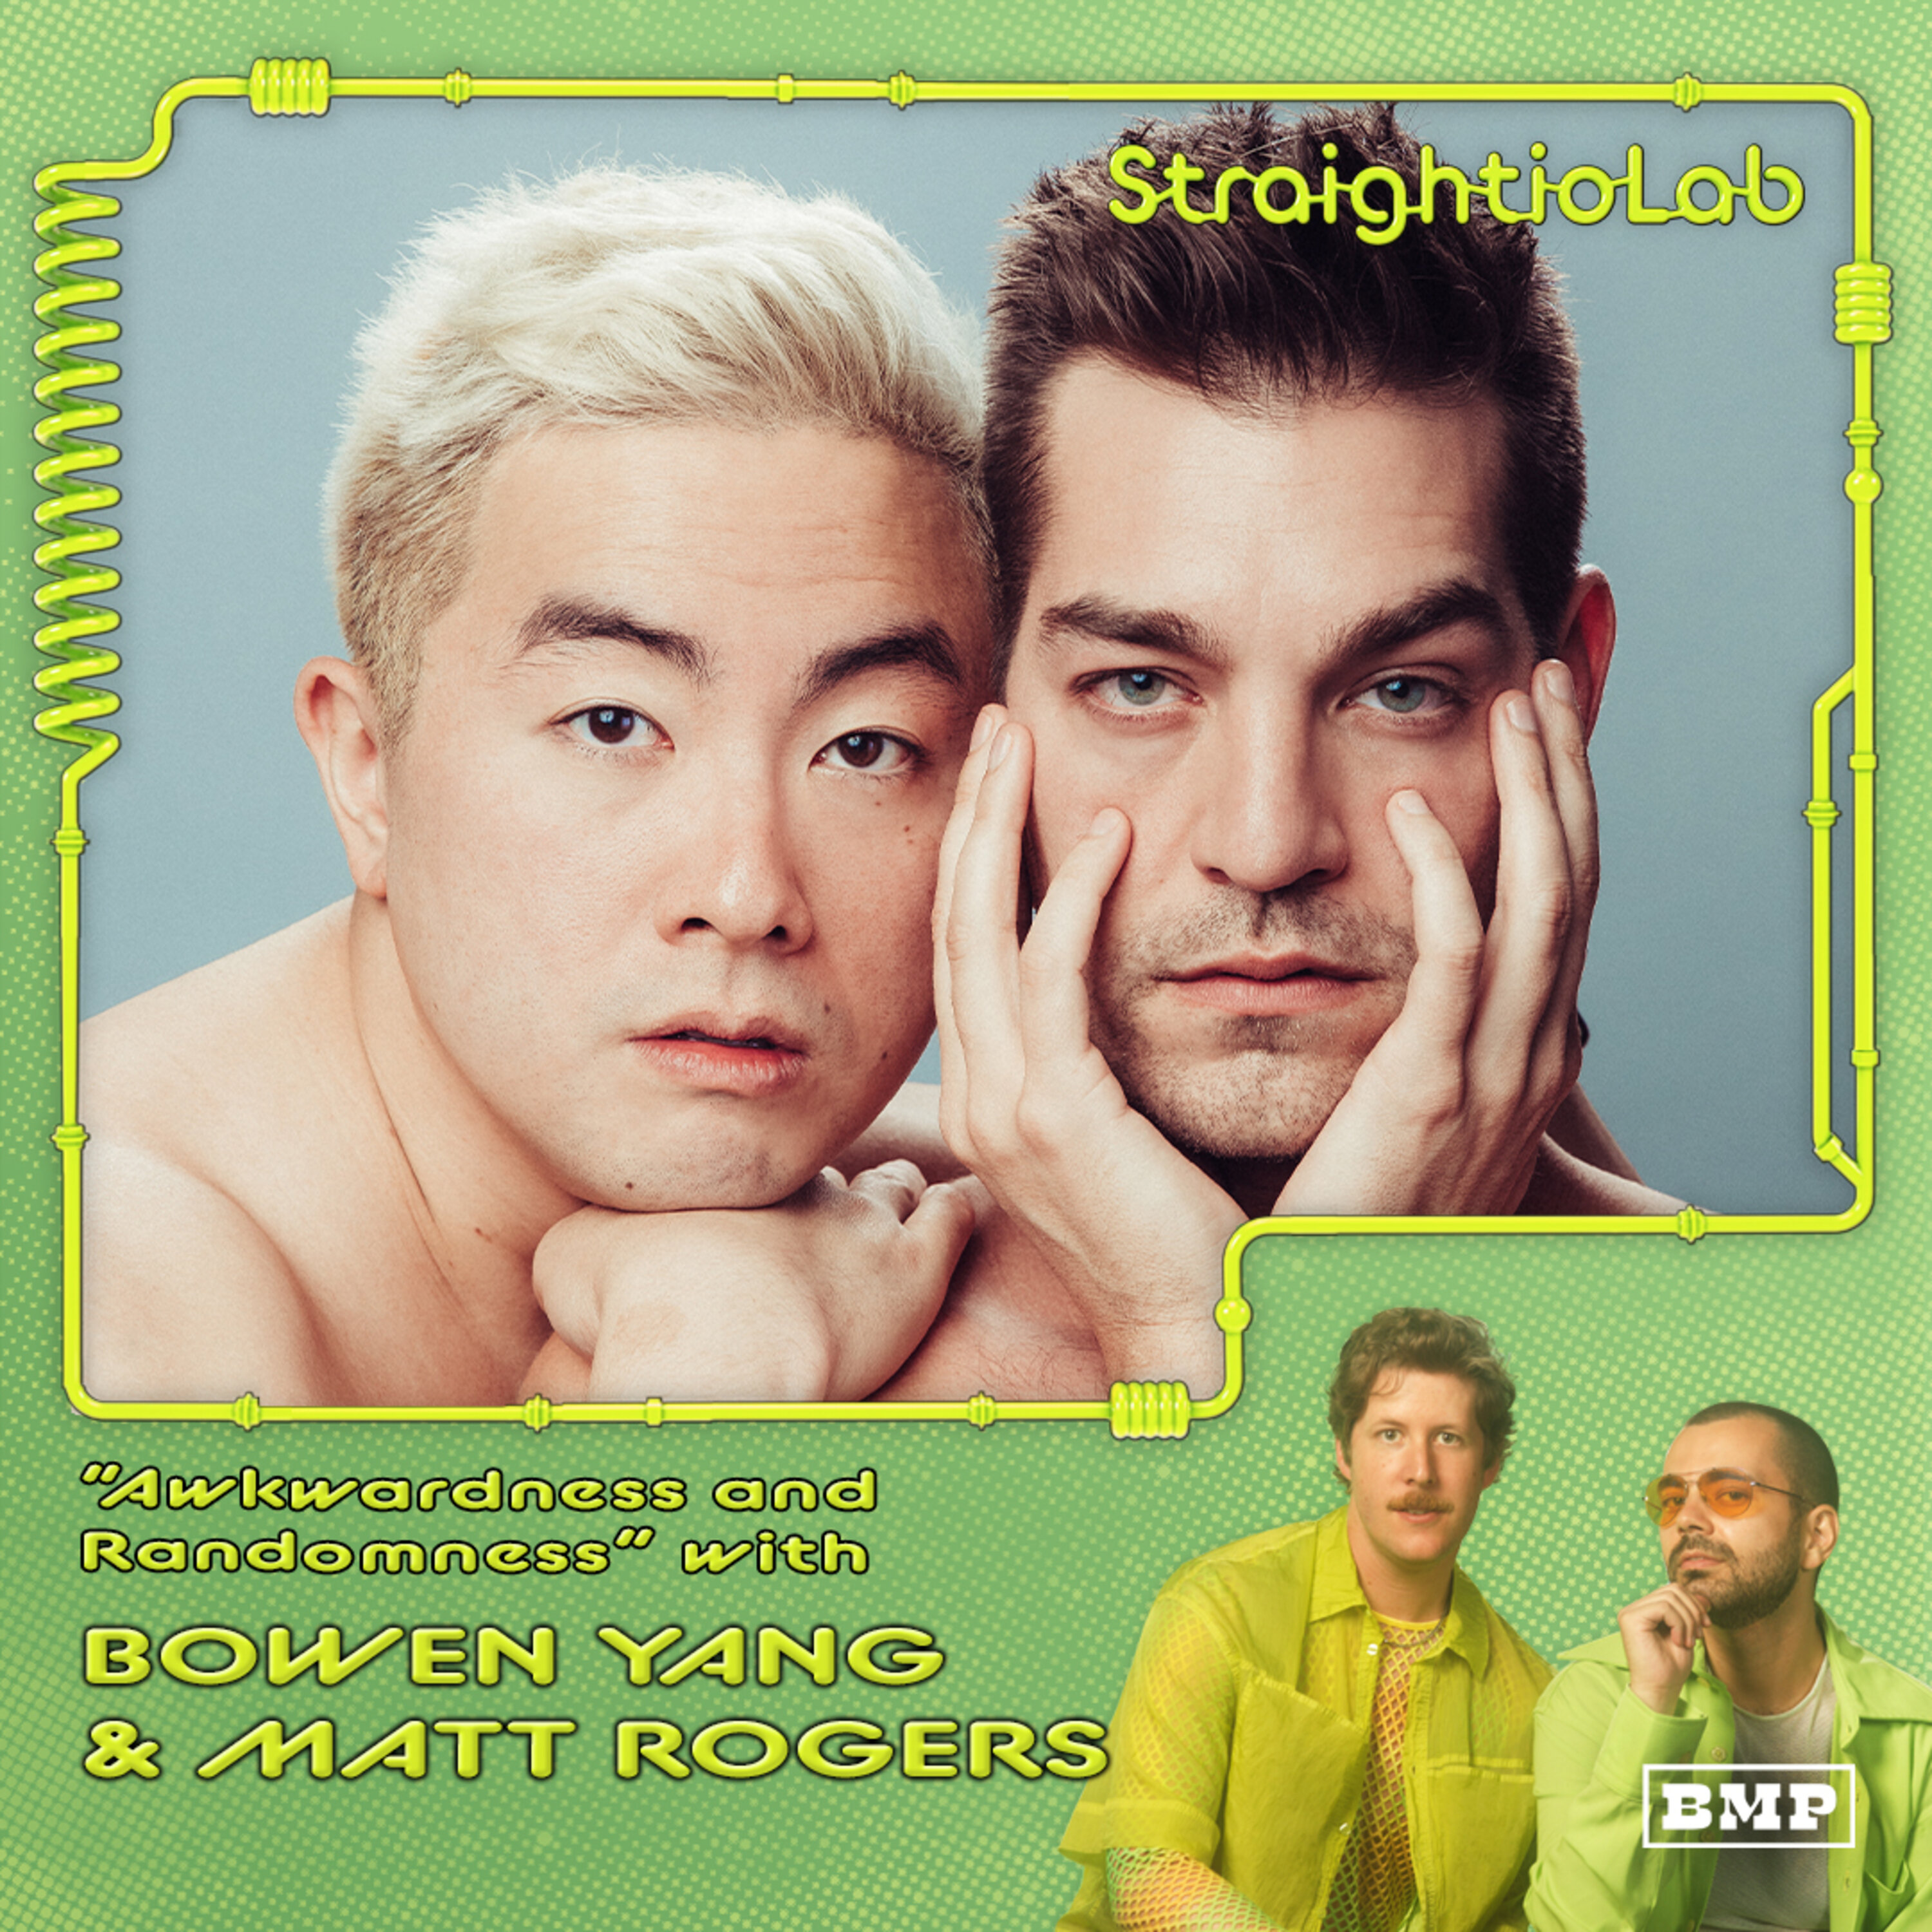 StraightioLab: "Awkwardness and Randomness" (with Matt Rogers and Bowen Yang)